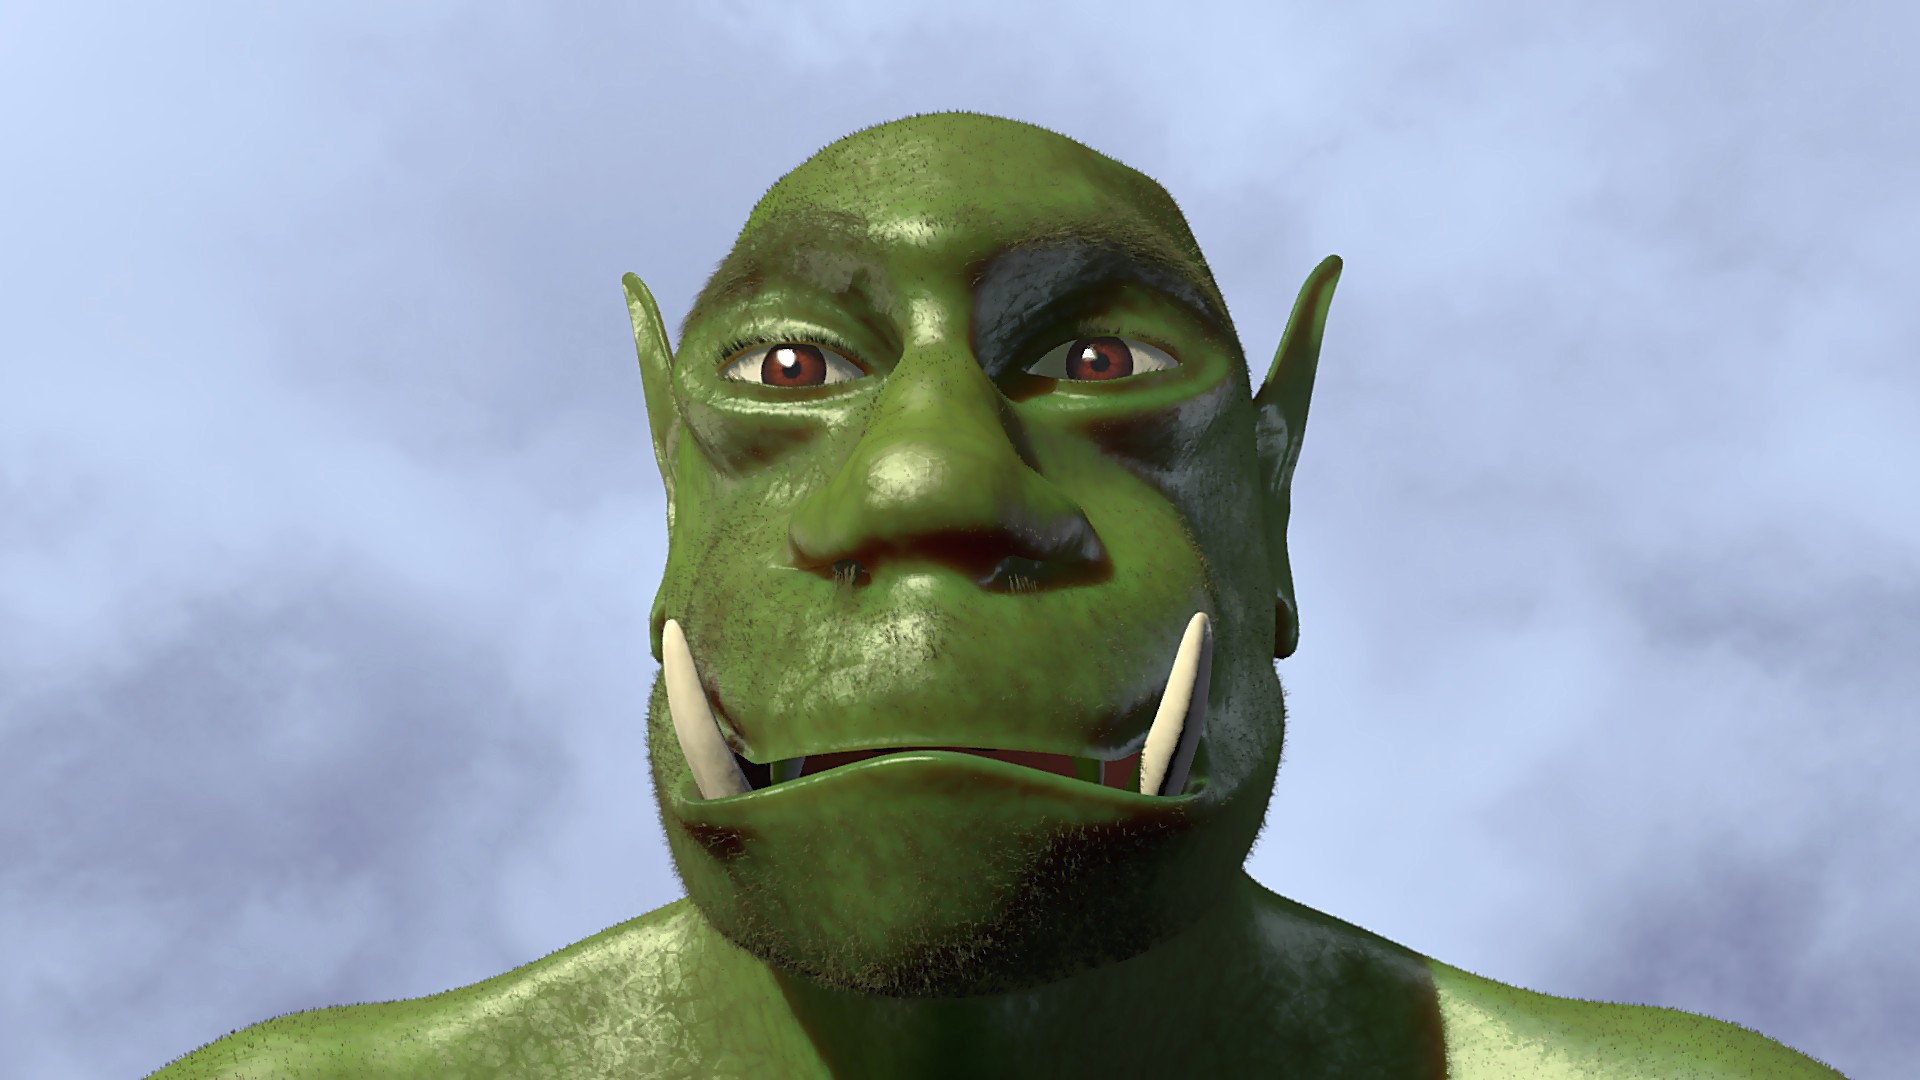 Featured image of post Meme Funny Profile Pictures Shrek / Shrek is the titular character from the animated film series by the same name created by dreamworks studios based on a book by american cartoonist william steig.